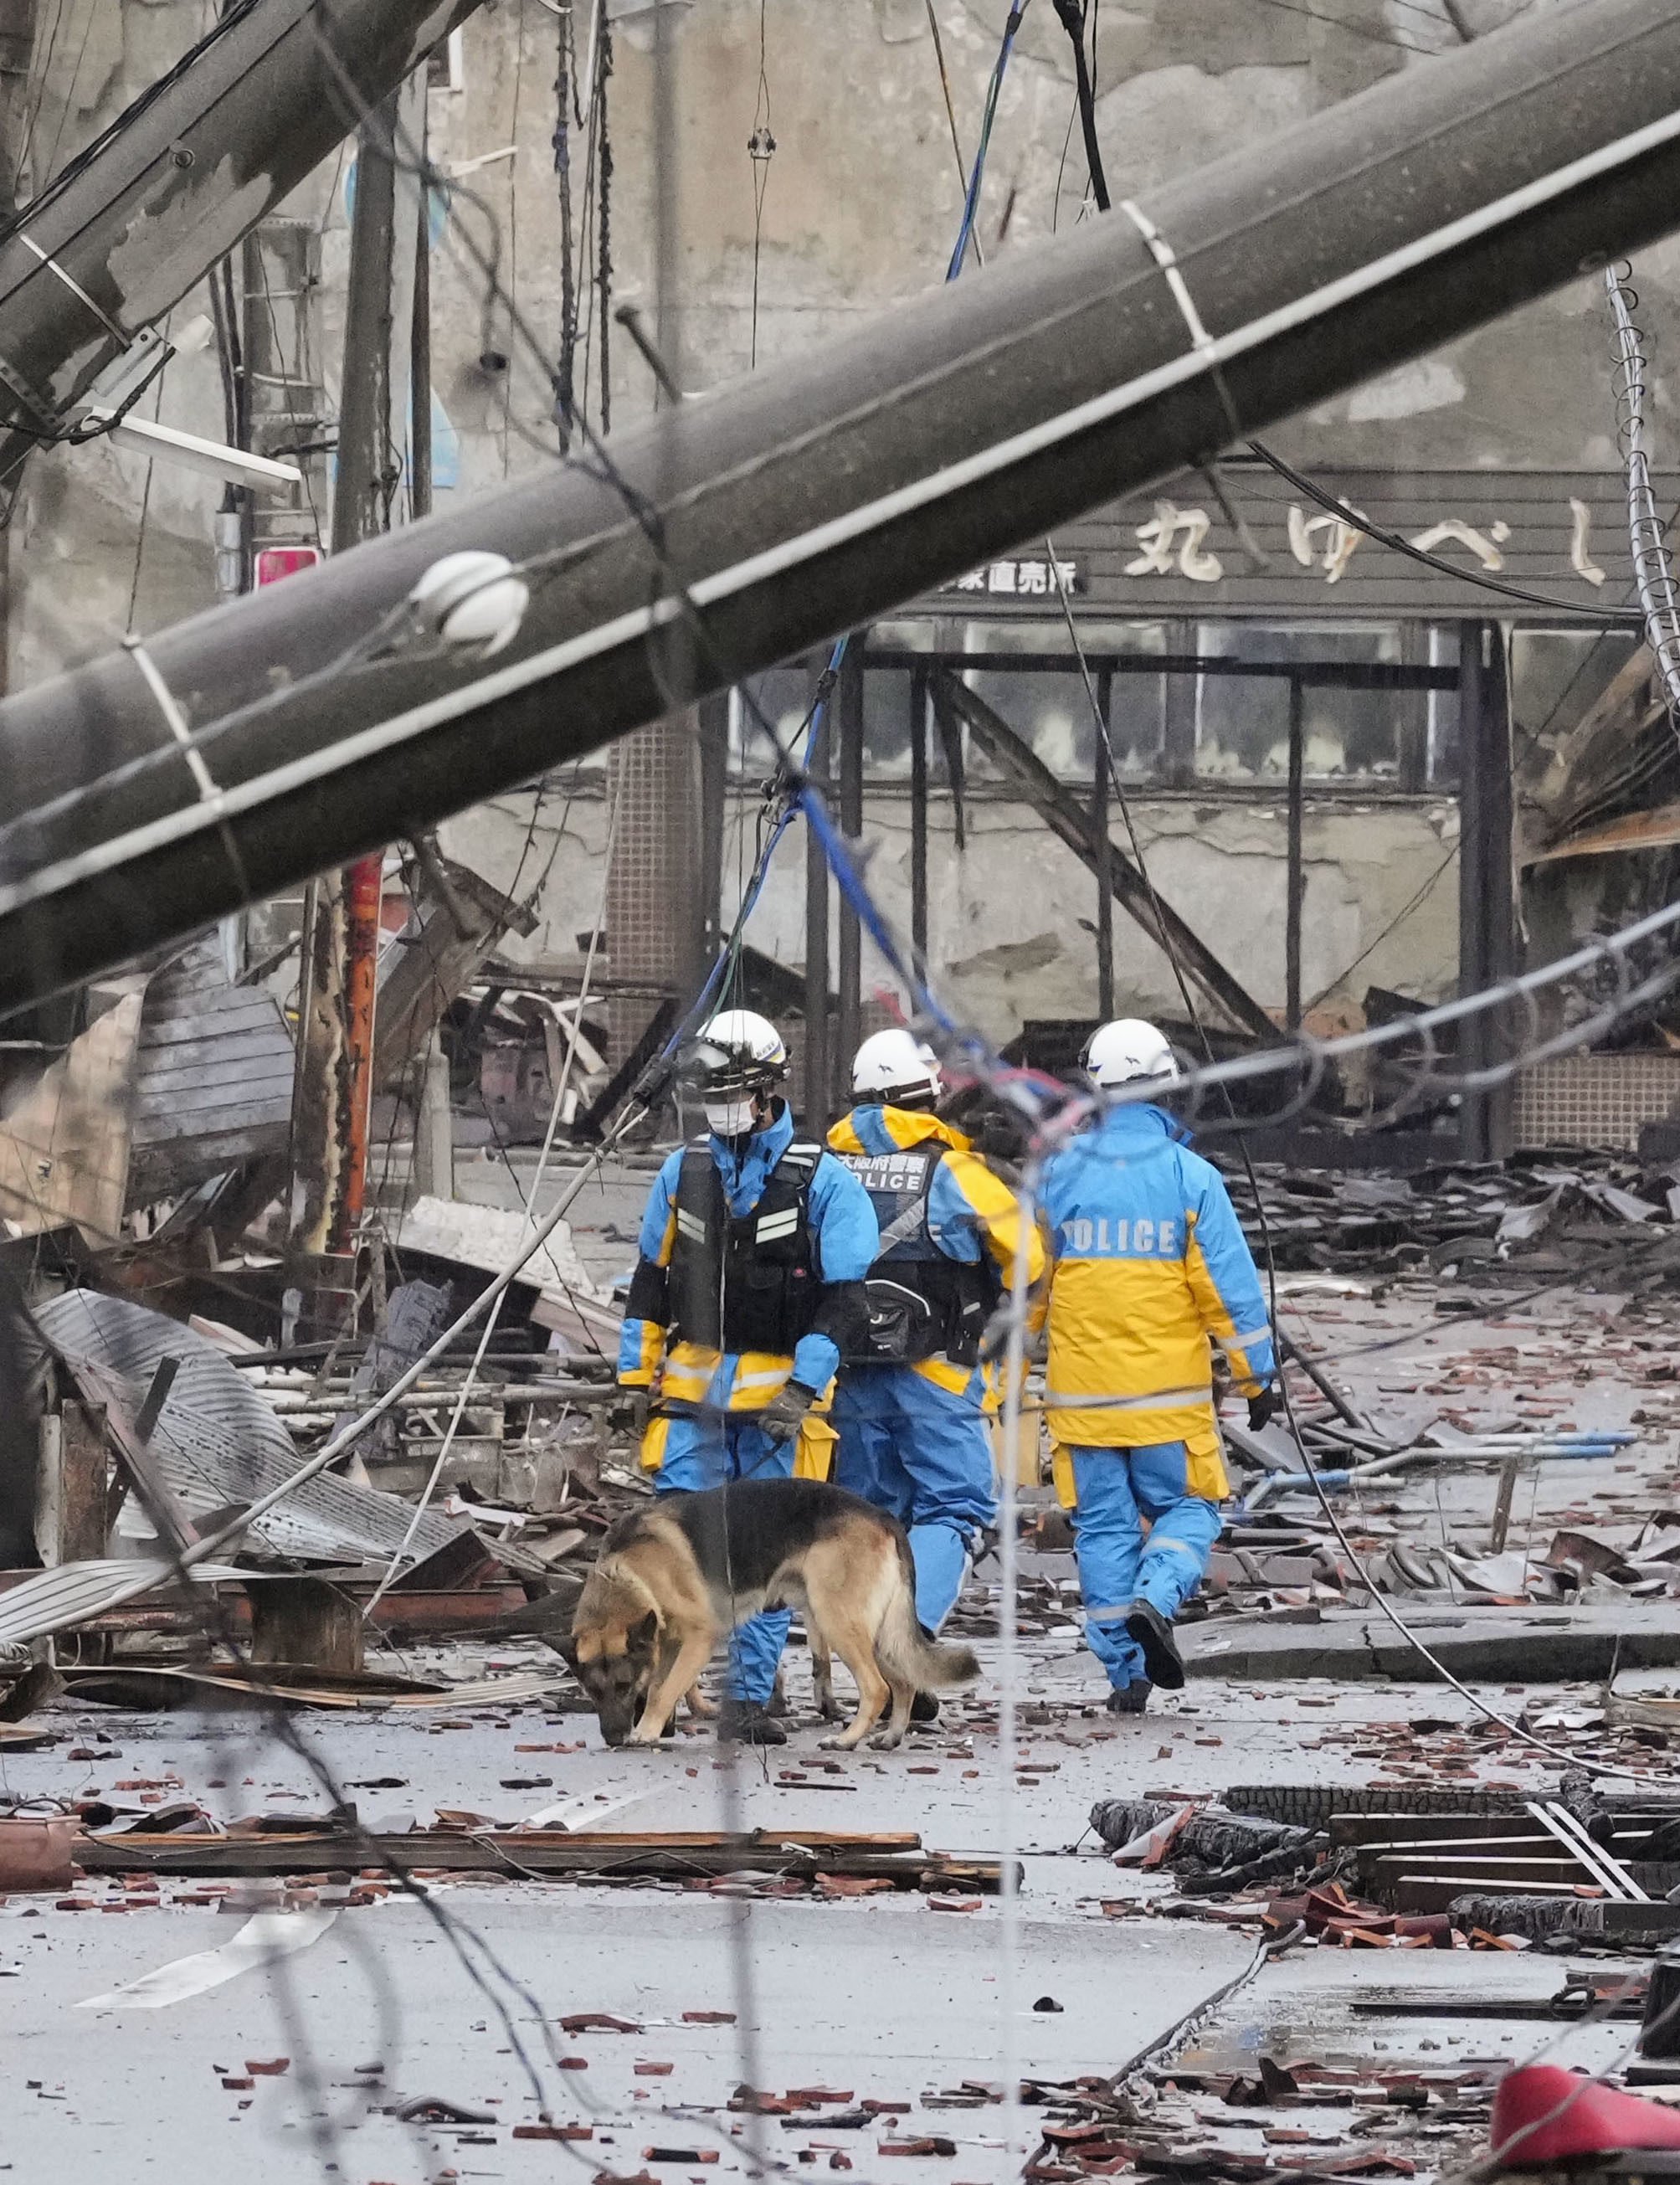 Police officers search for survivors in Japan’s Ishikawa prefecture on Sunday following the deadly New Year’s Day earthquake. Photo: Kyodo